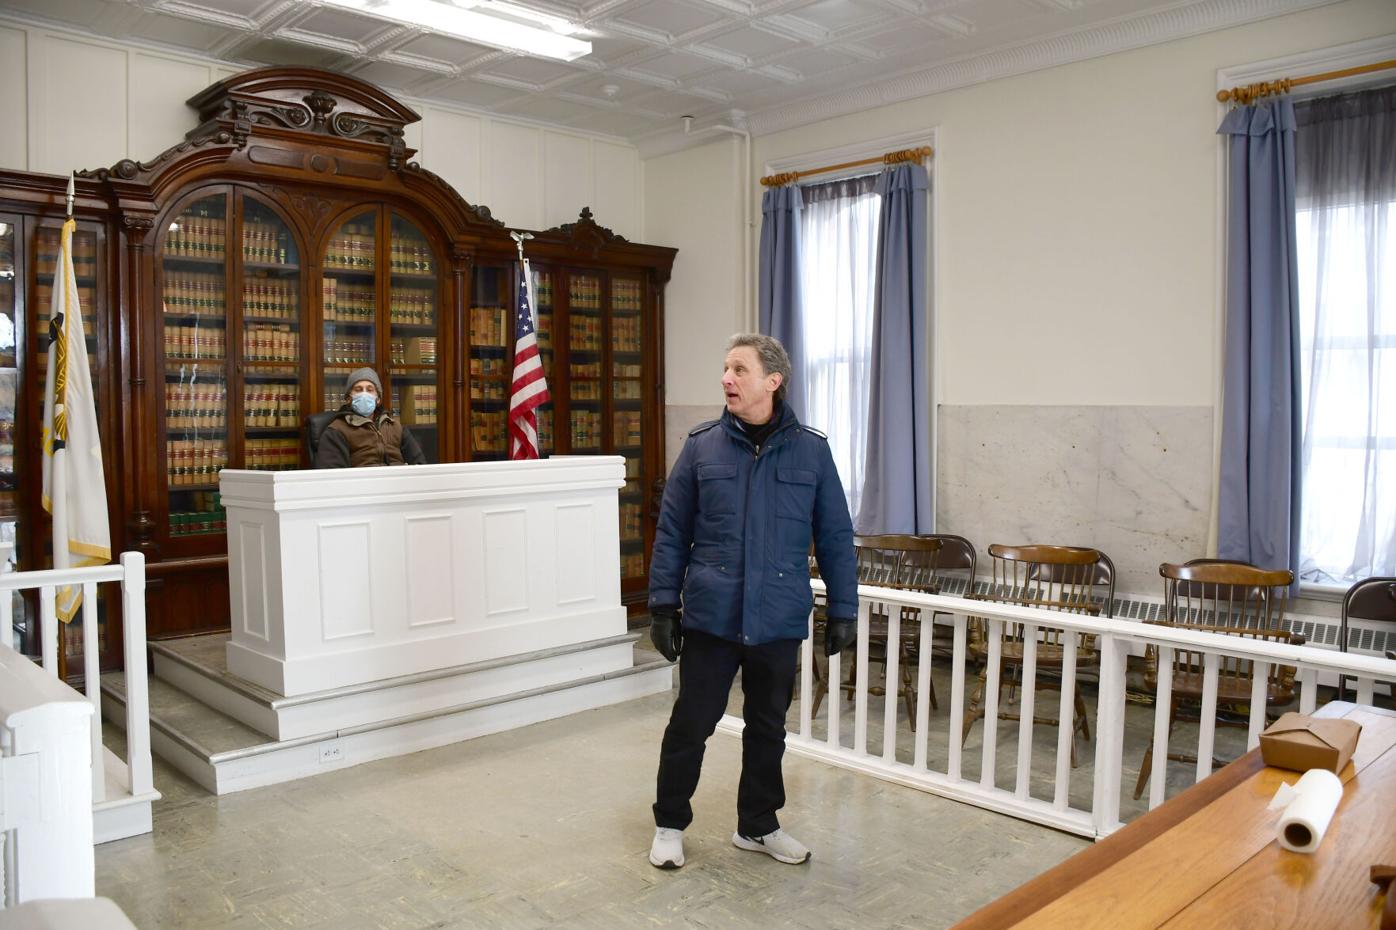 The director stands inside the courtroom